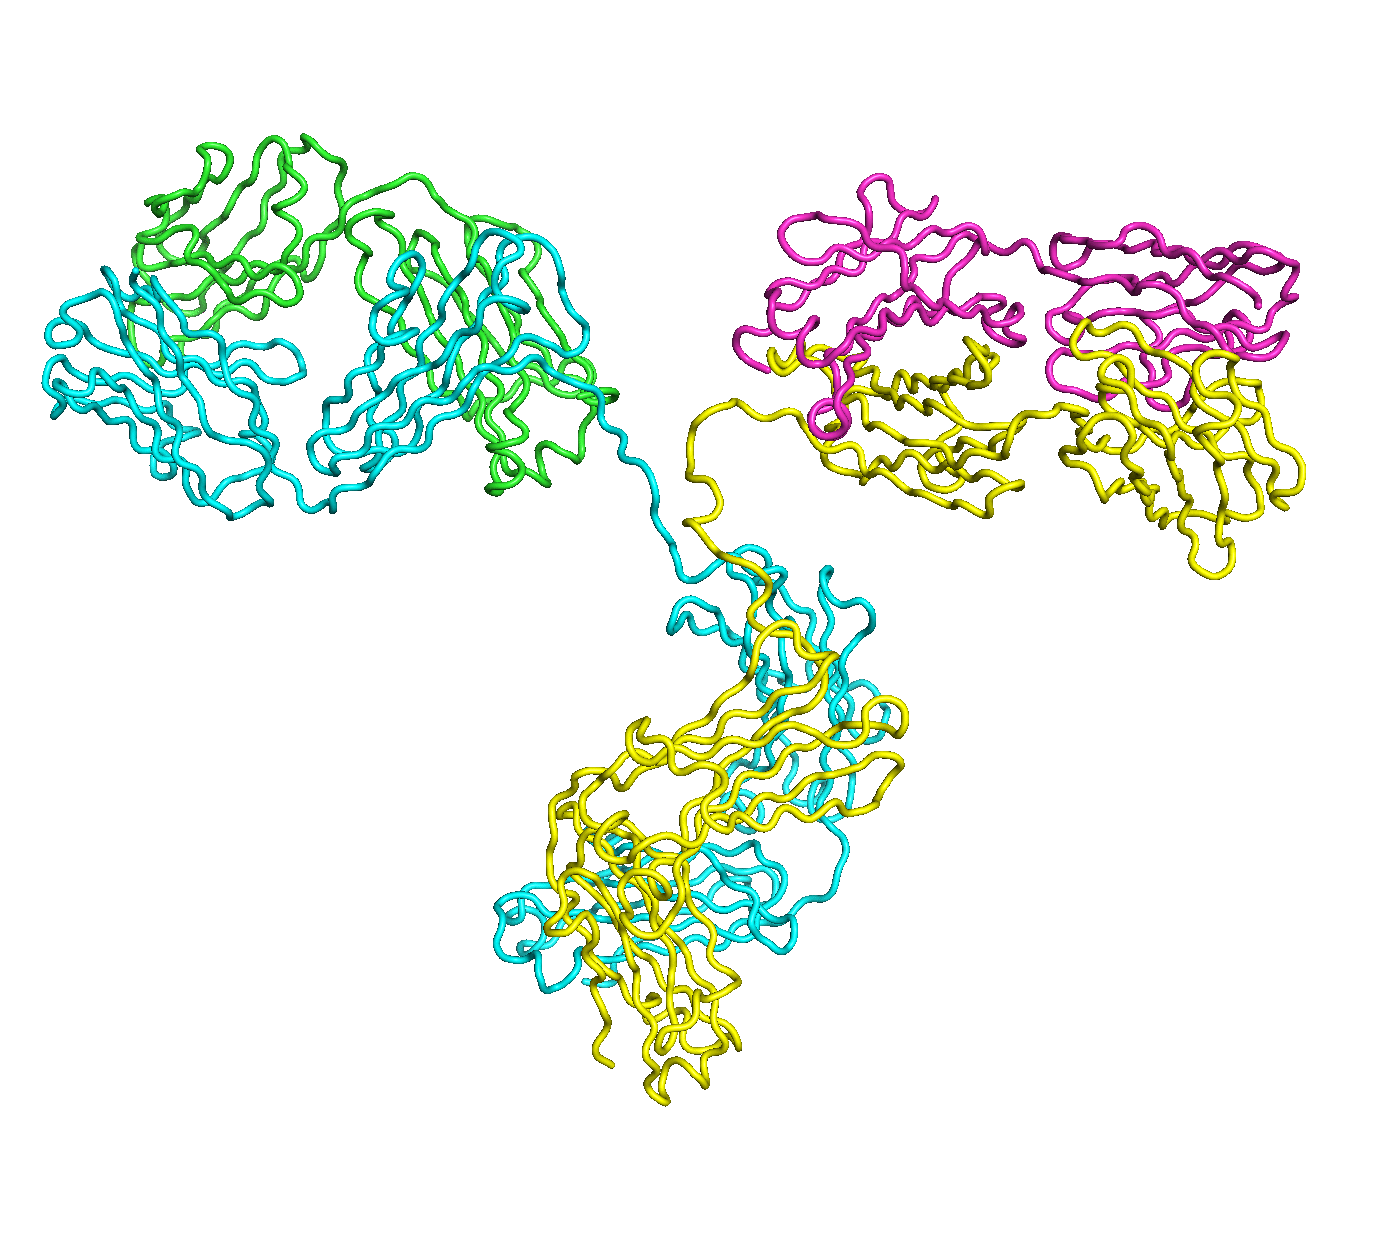 A sample of 15 antibody conformations